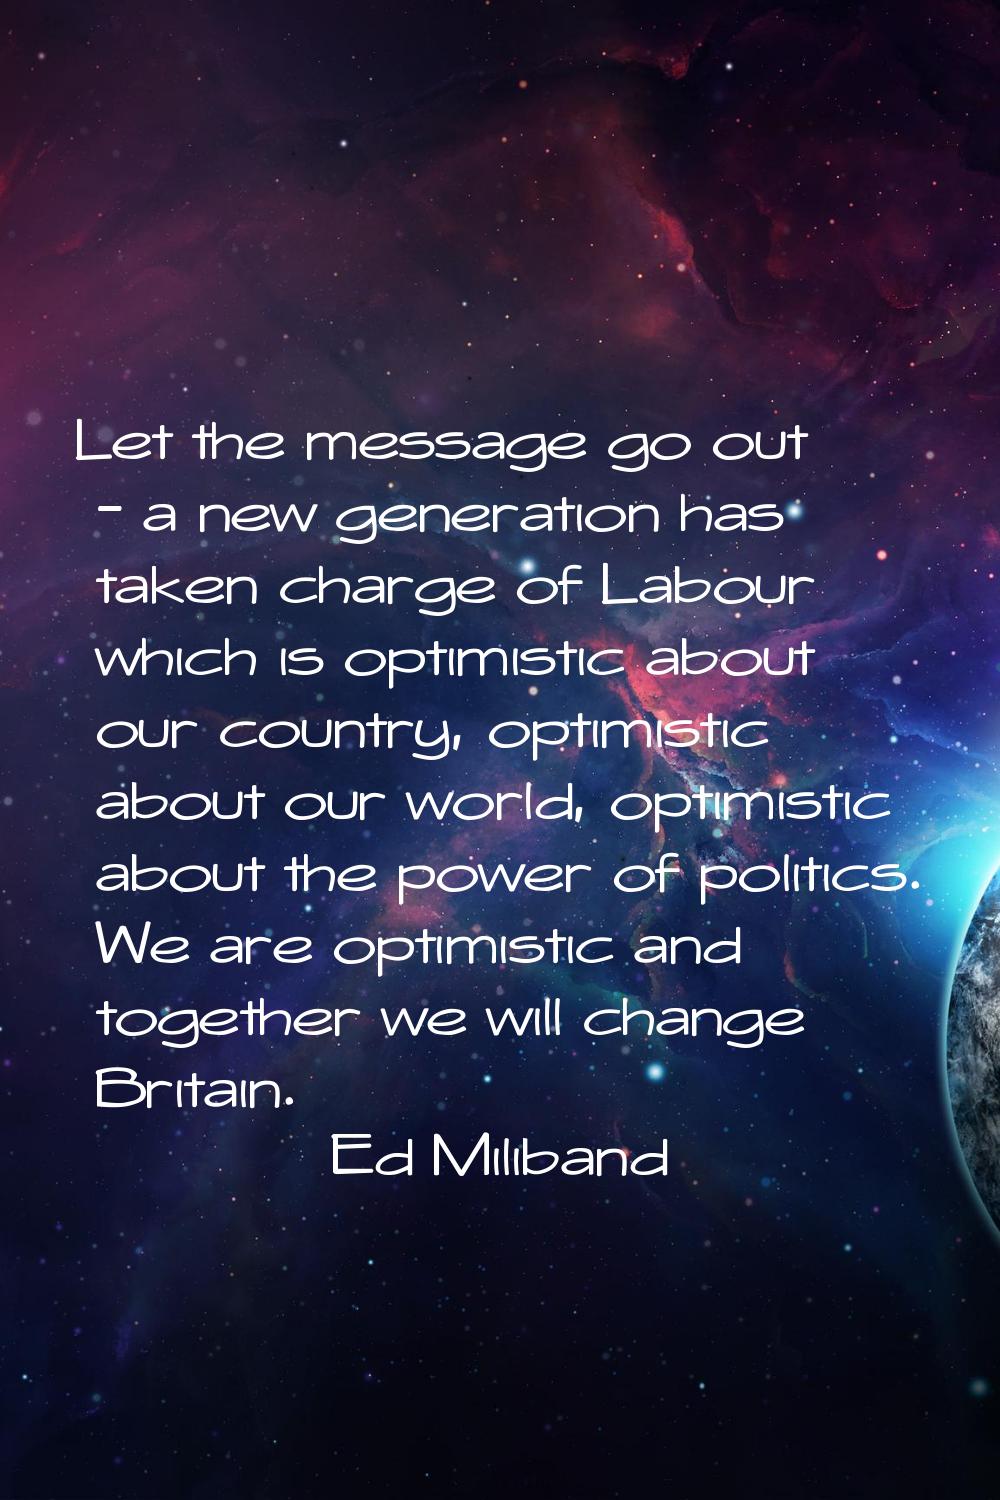 Let the message go out - a new generation has taken charge of Labour which is optimistic about our 